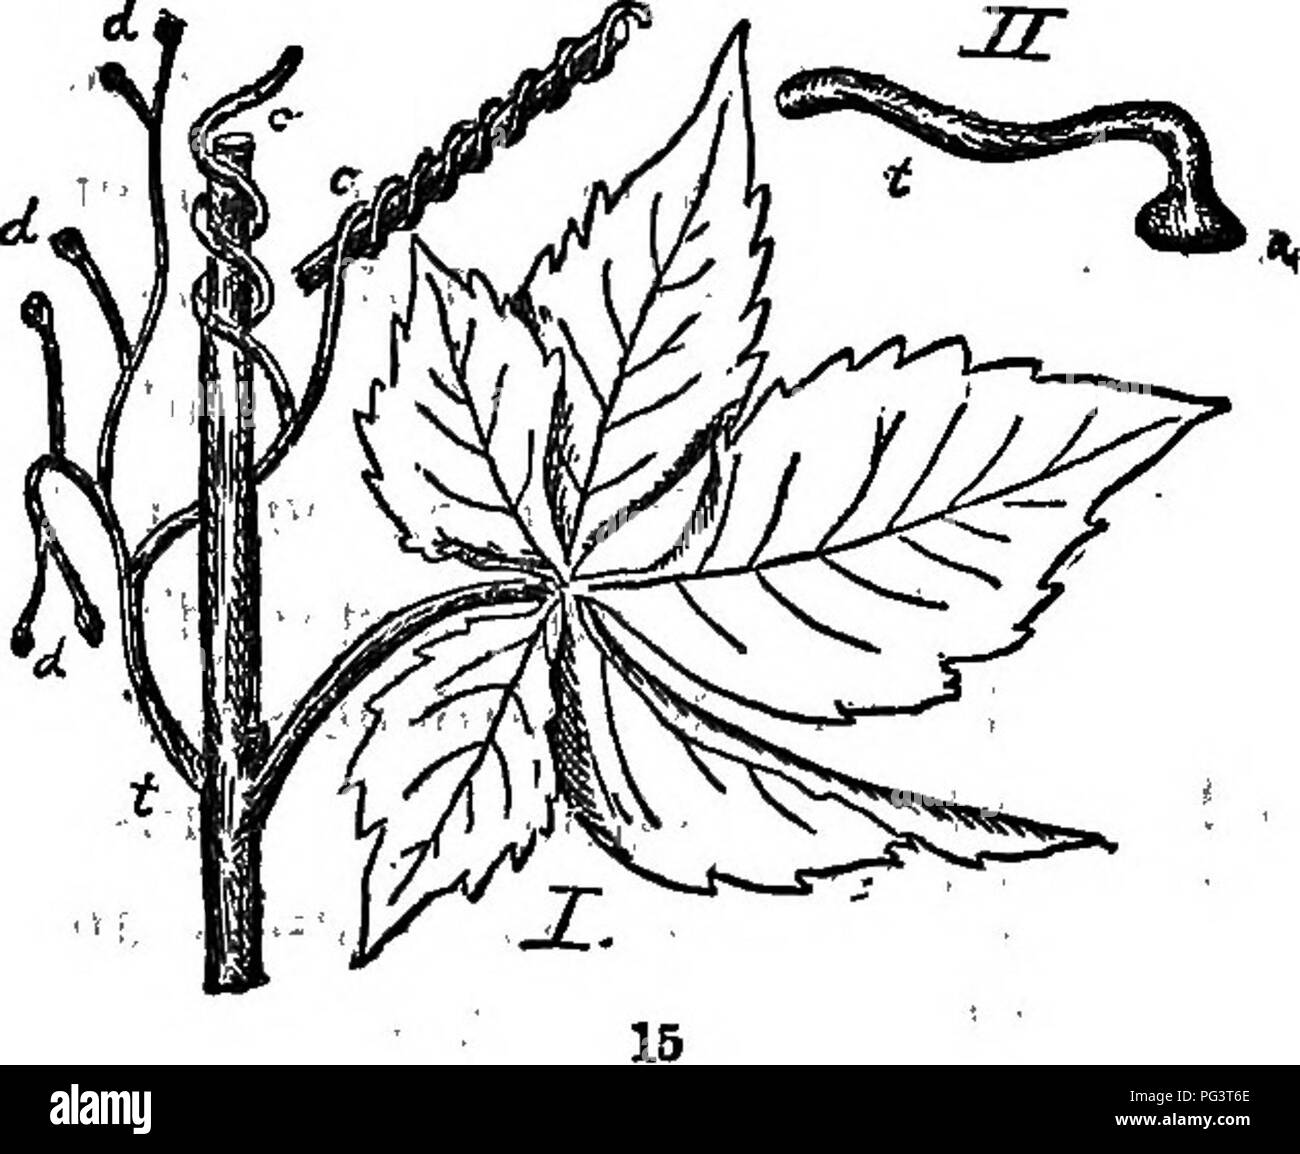 . The elements of botany embracing organography, histology, vegetable physiology, systematic botany and economic botany ... together with a complete glossary of botanical terms. Botany. TffE STEM. 23. hook. Then the whole tendril shortens by coiling up spirally, thus bringing the plant nearer the support. The Virginia Creeper ^^ develops the ten- dril-tips into adher- ing disks when it climbs walls or smooth trees (Fig. 15). Other ten- drils, as of the Pea, etc., are modified leaves instead of branches. Spines, or thorns, are sometimes stunted and hardened branched, as in neglected Pear-trees, Stock Photo